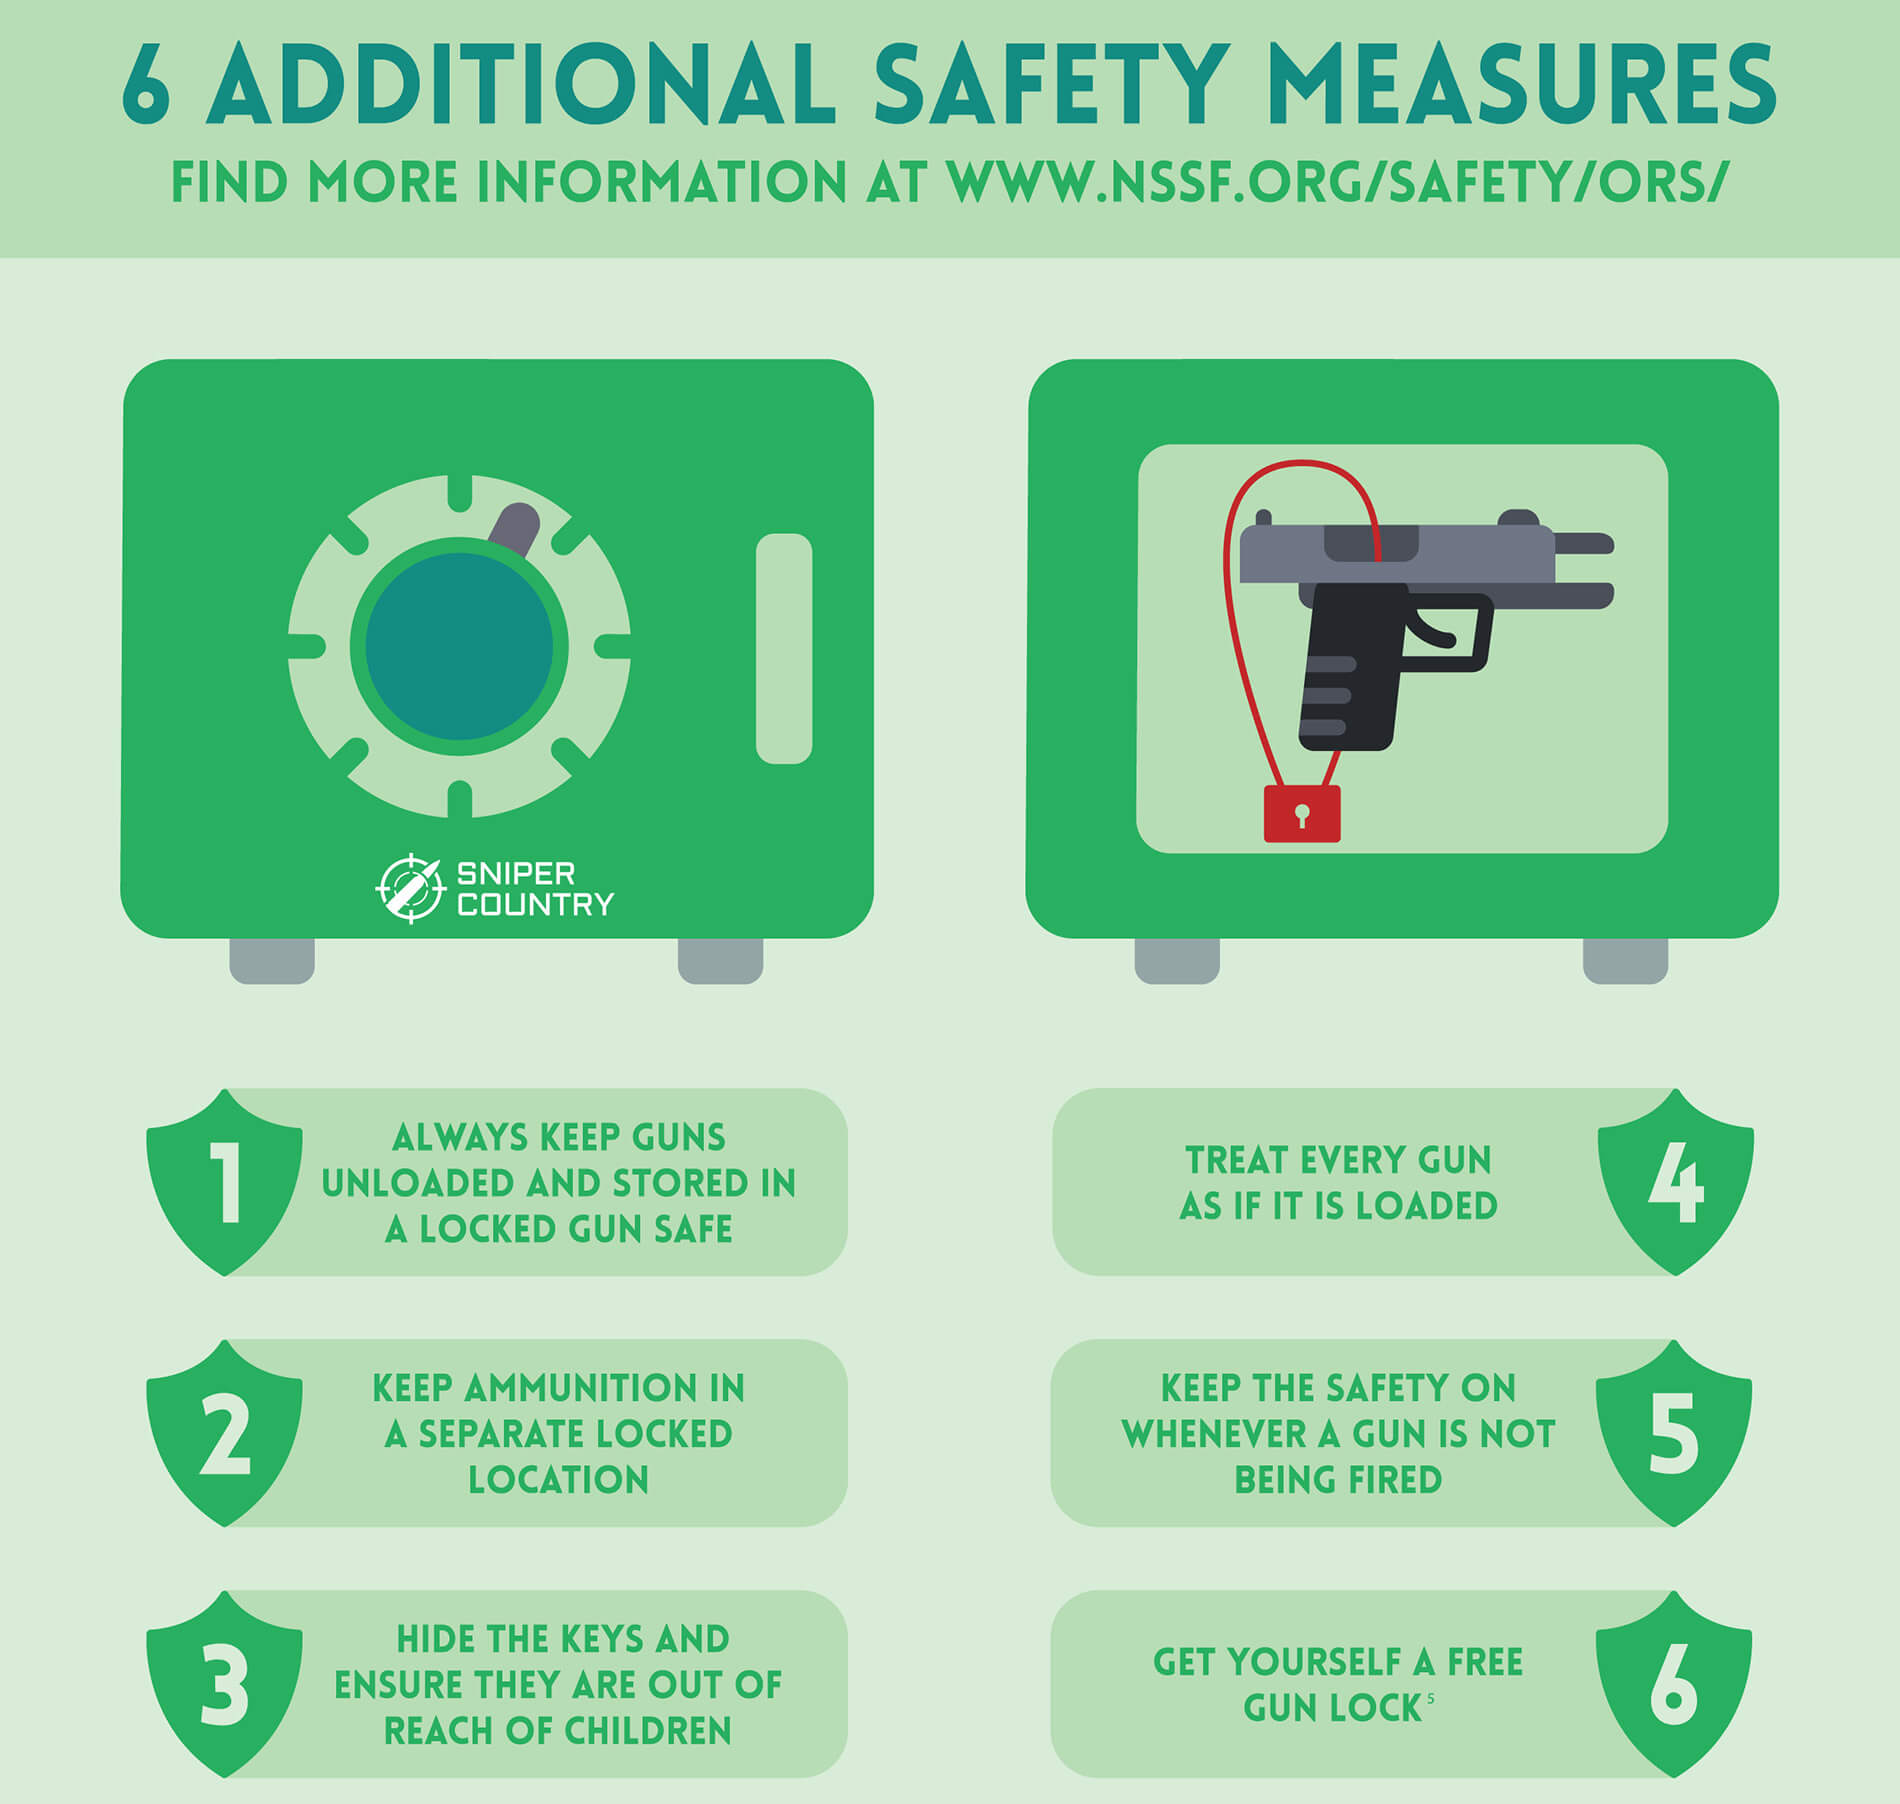 How to store guns safely